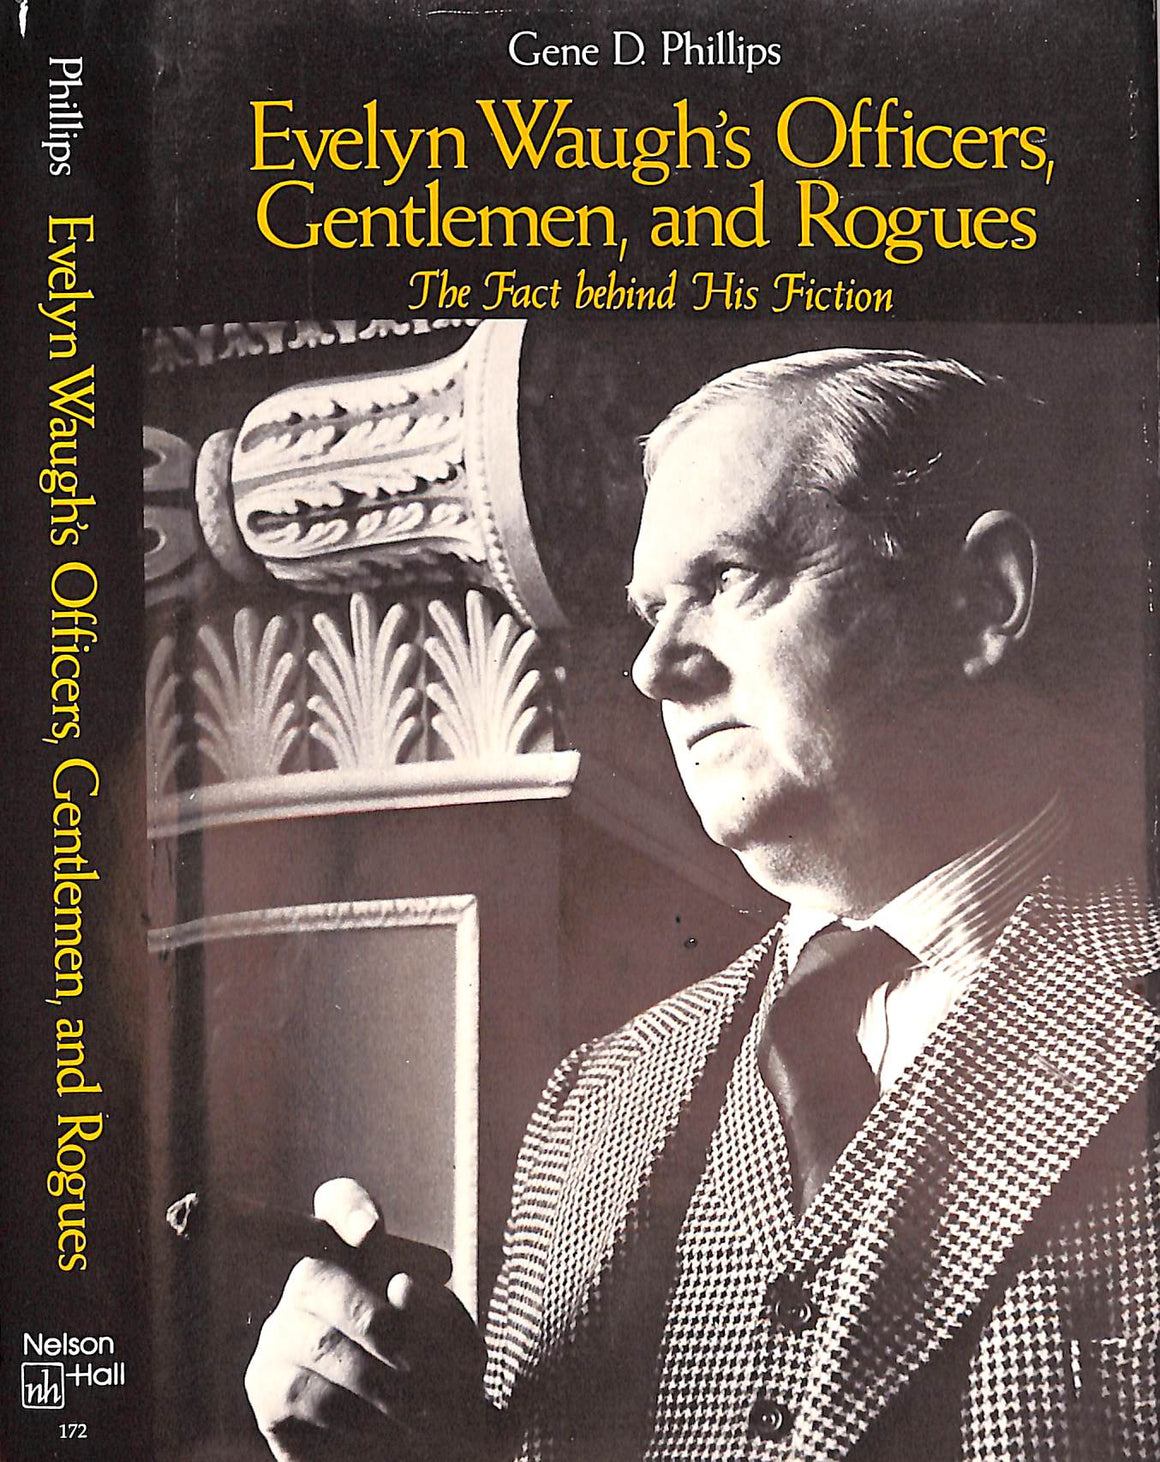 "Evelyn Waugh's Officers, Gentlemen, And Rogues" 1975 PHILLIPS, Gene D.